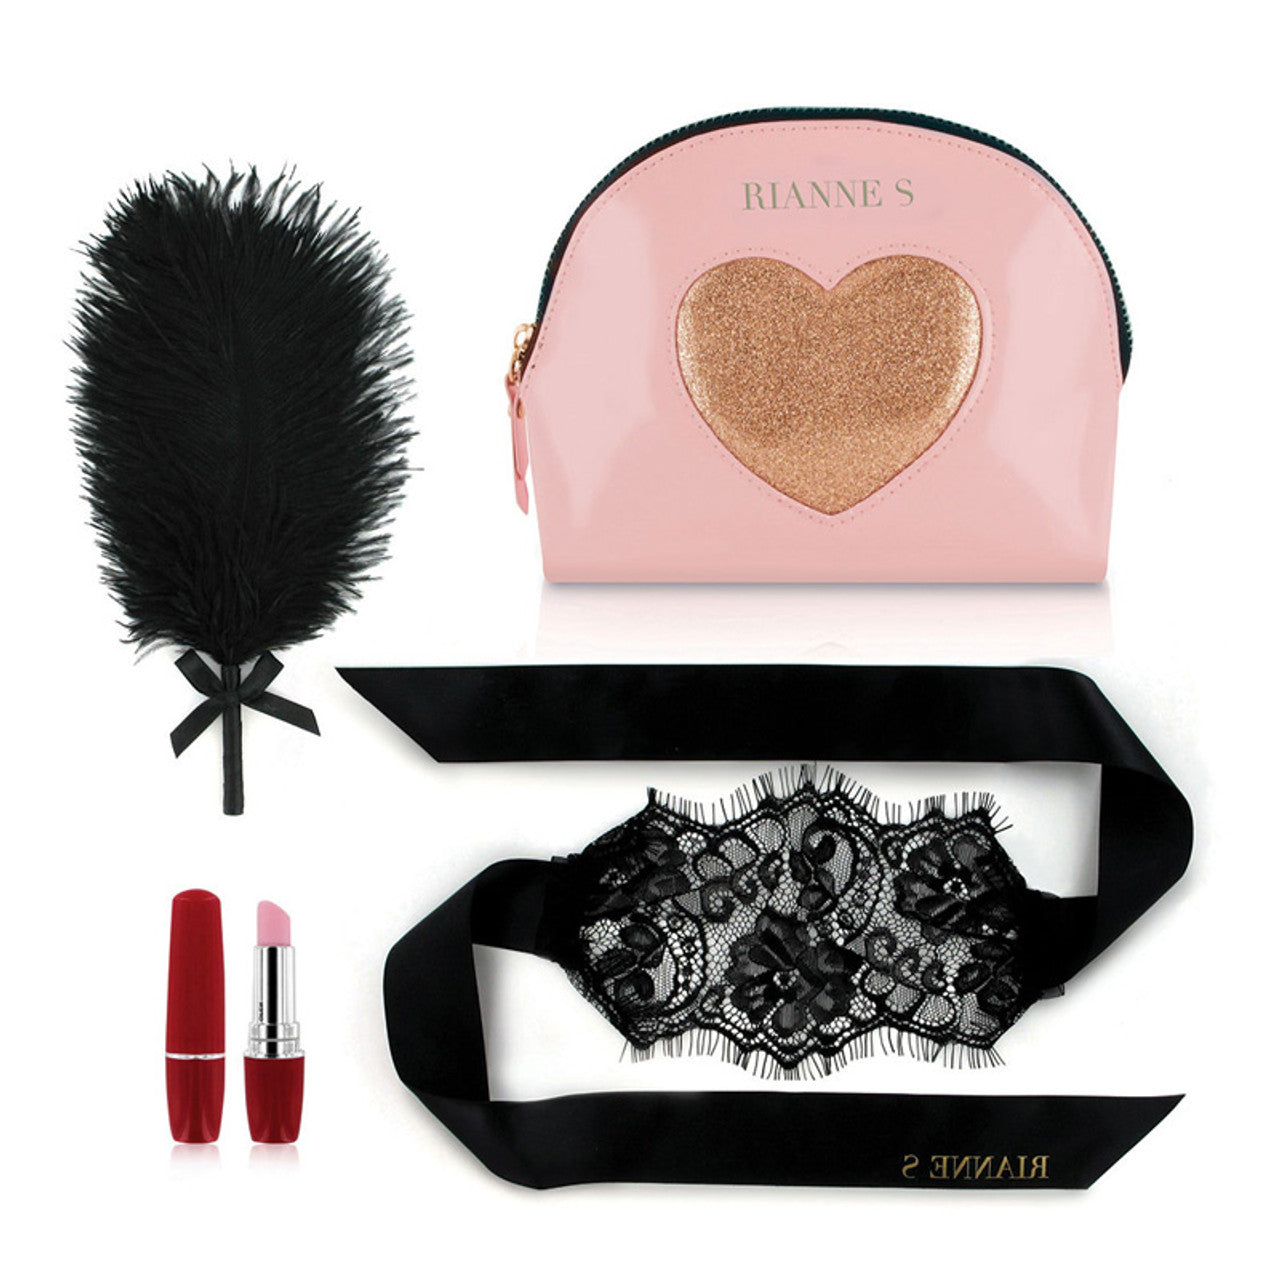 Rianne's Kit D'Amour Pink